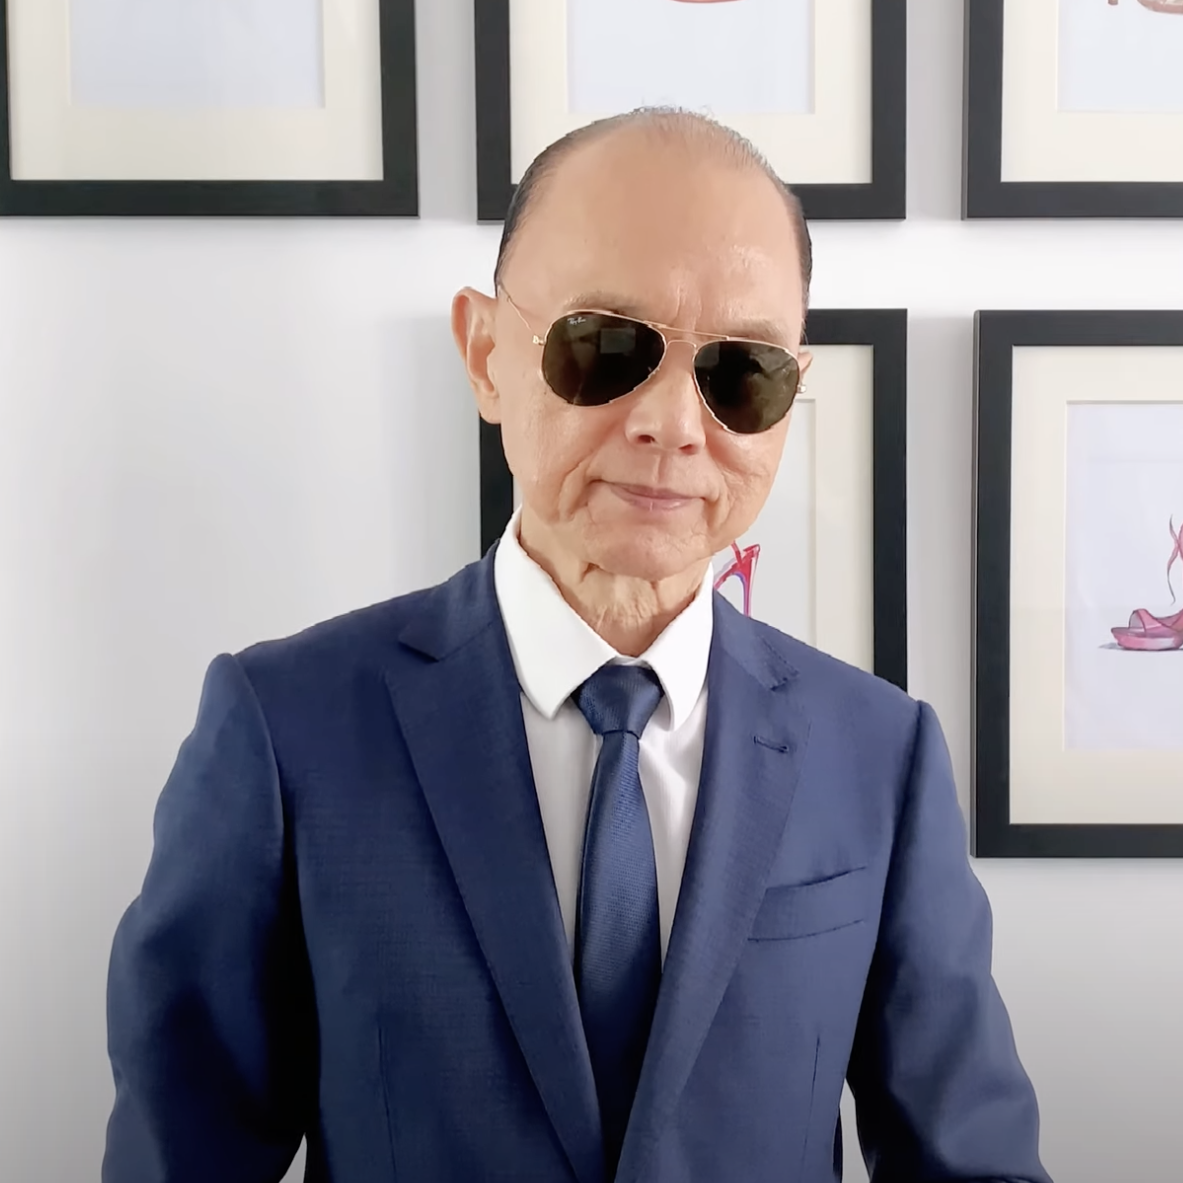 Personal message from Jimmy Choo